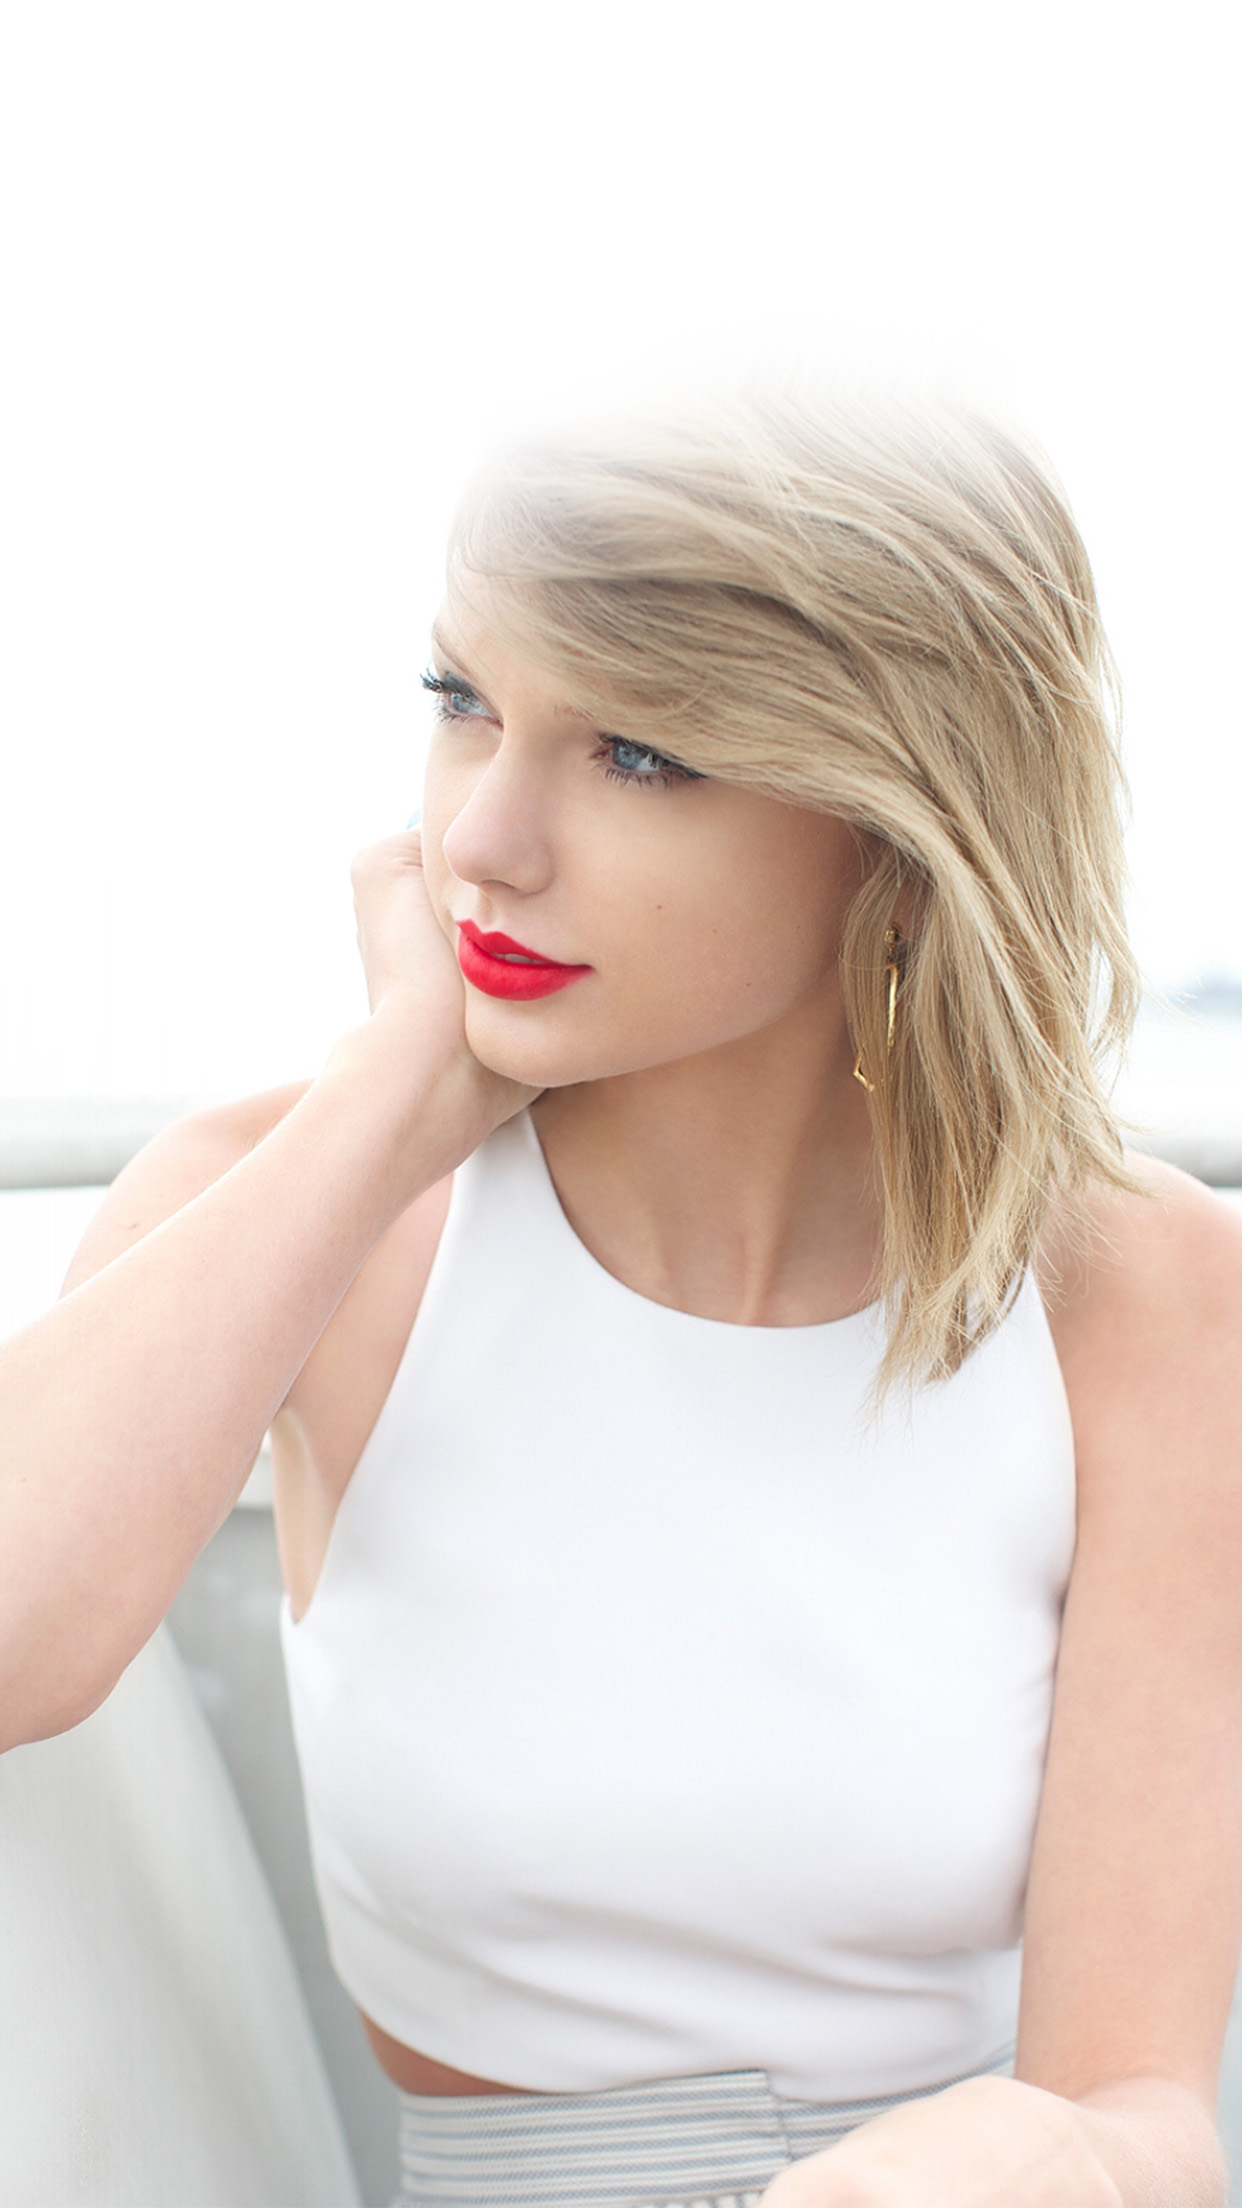 taylor swift iphone wallpaper,hair,face,blond,skin,white